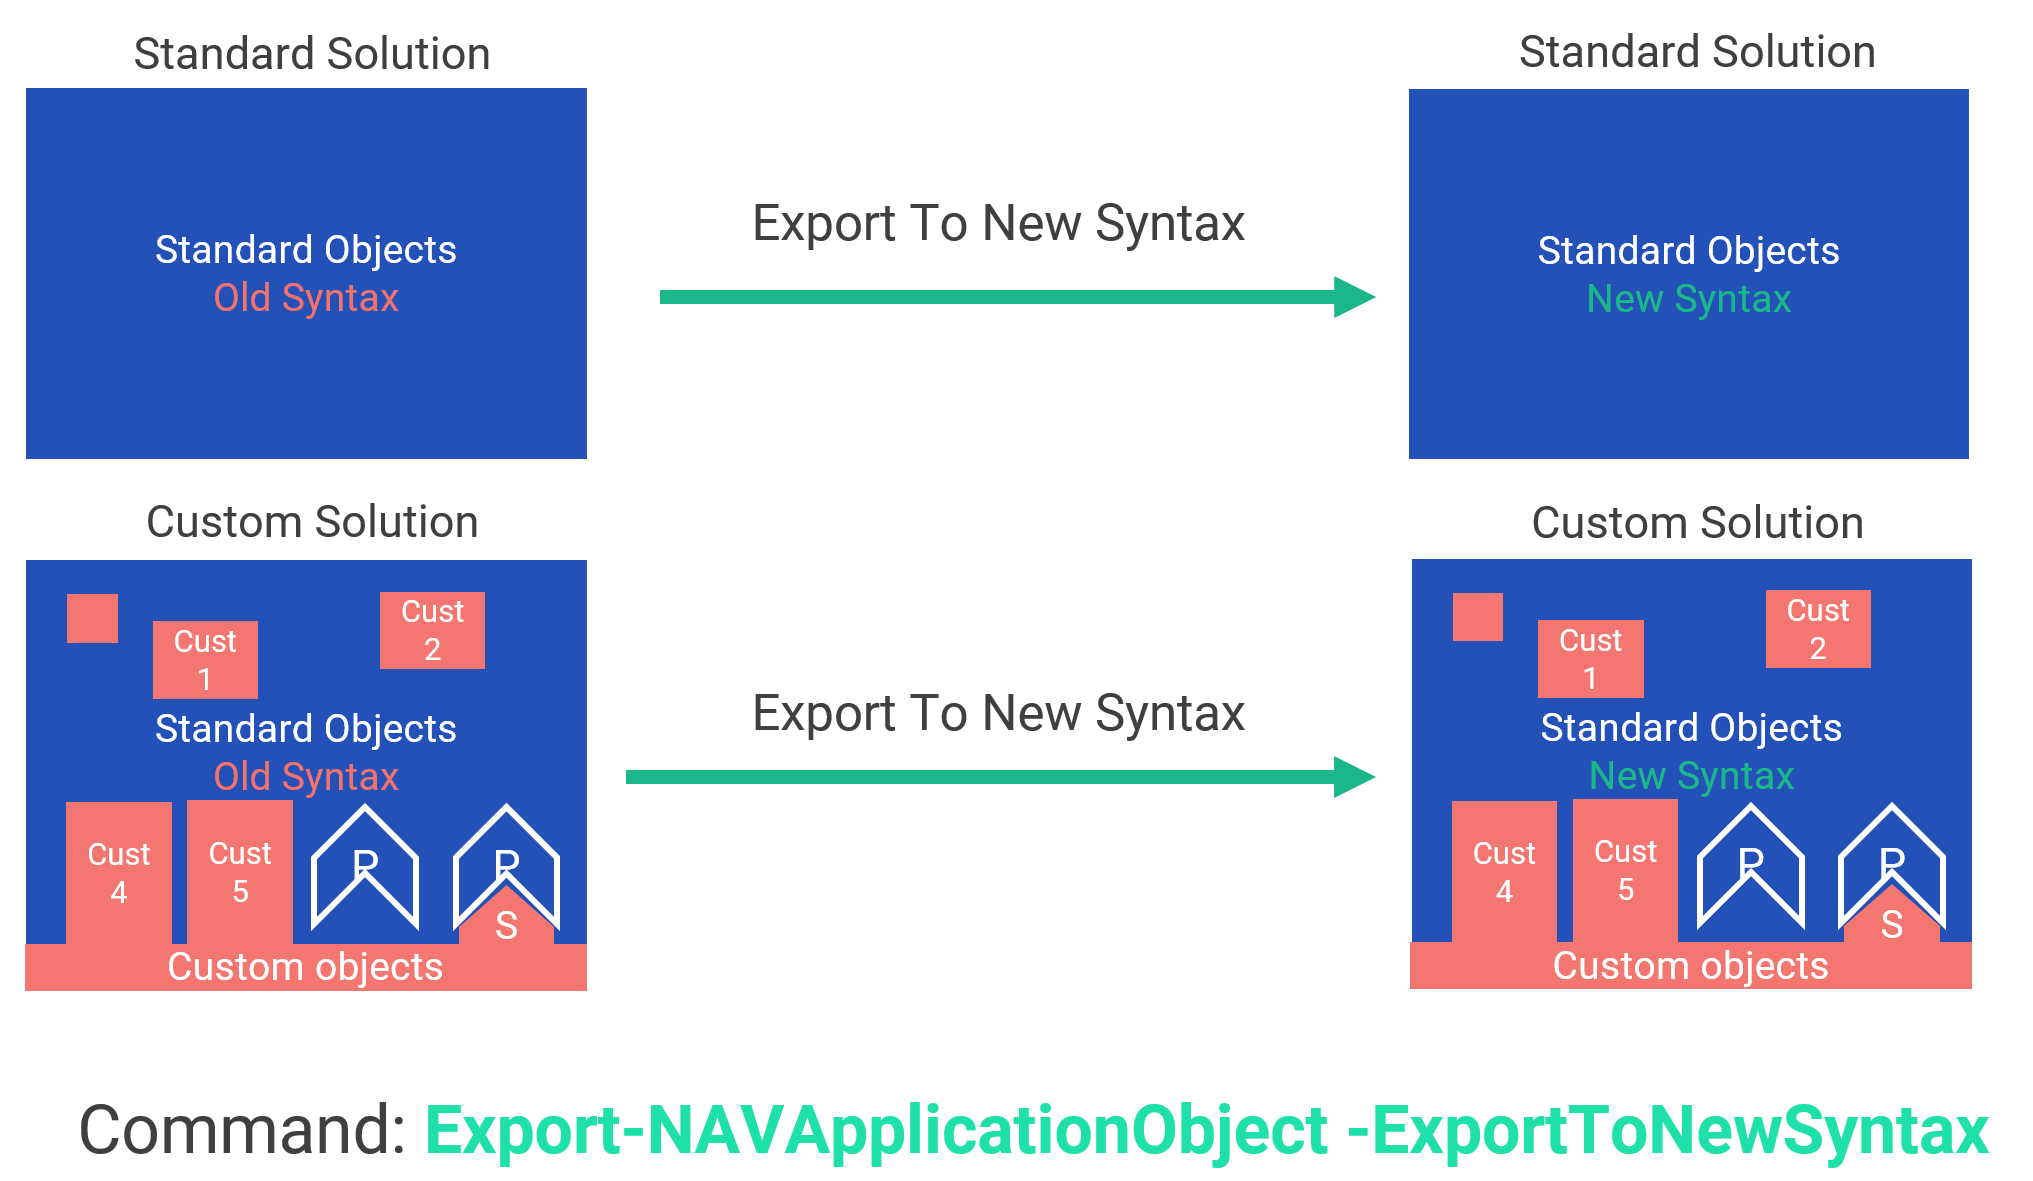 Export objects to new sytax